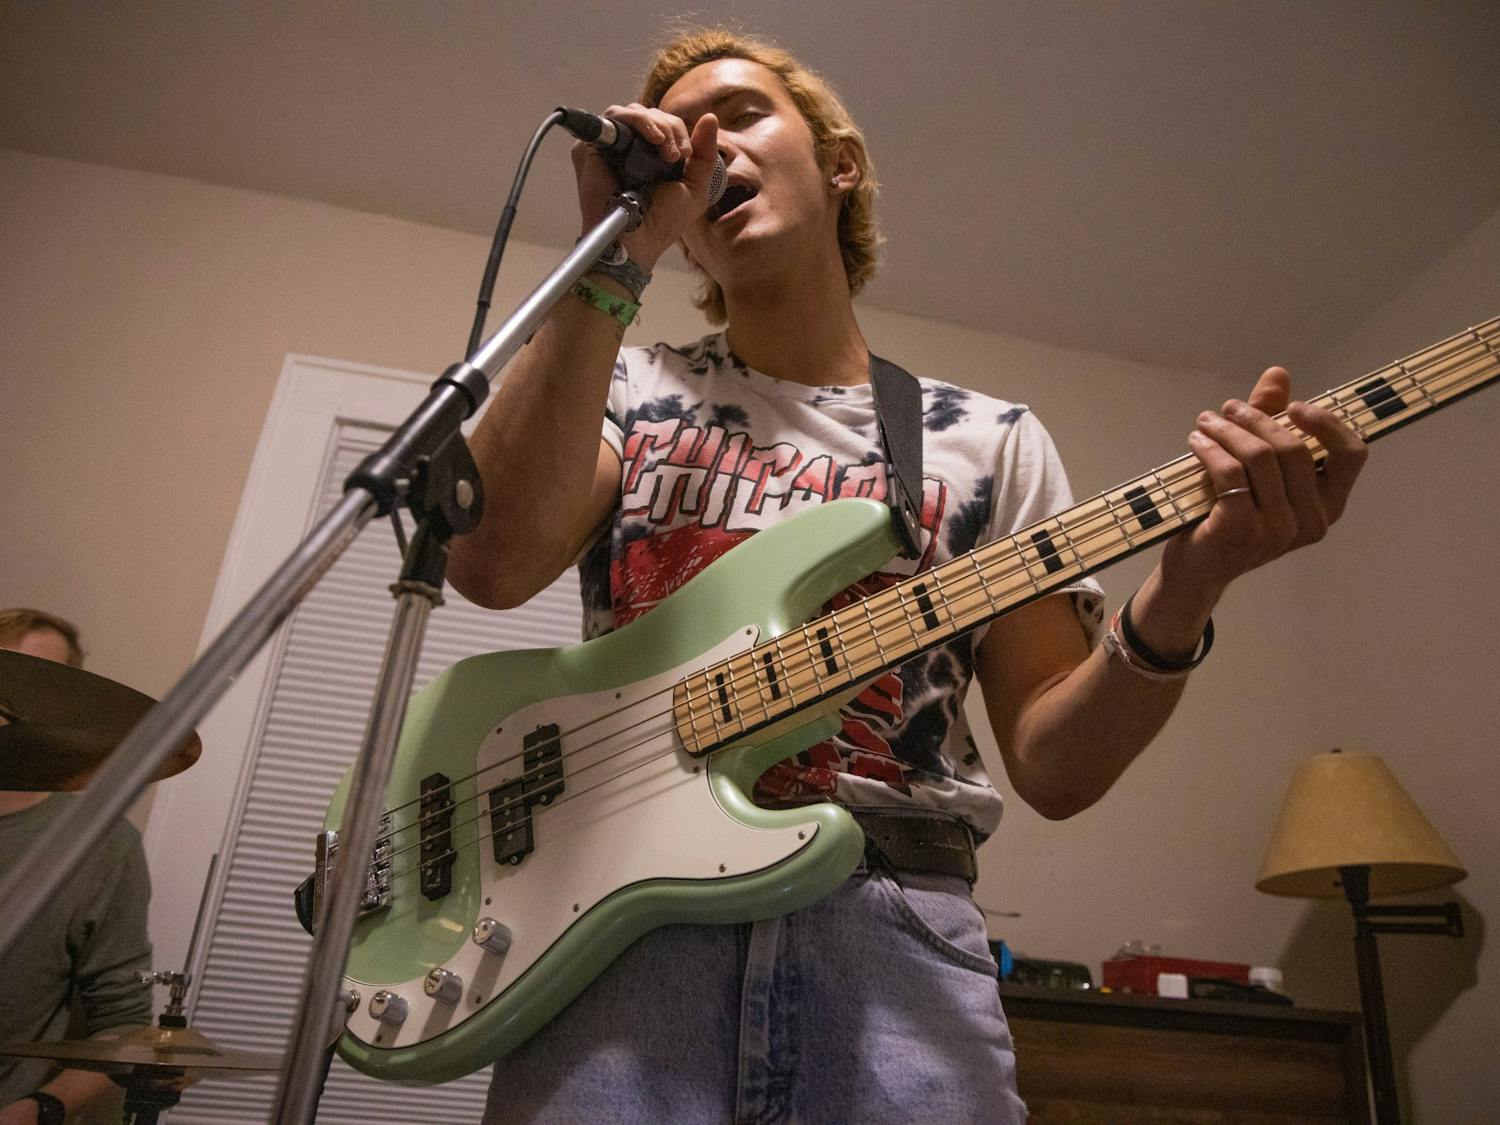 Nick Trombetta, bassist for Flesh Tuxedo, practices with his band on Friday, Nov. 8, 2019. Flesh Tuxedo is just one of three bands in which Trombetta plays, the others named Madam! Madam! and Screen Time.